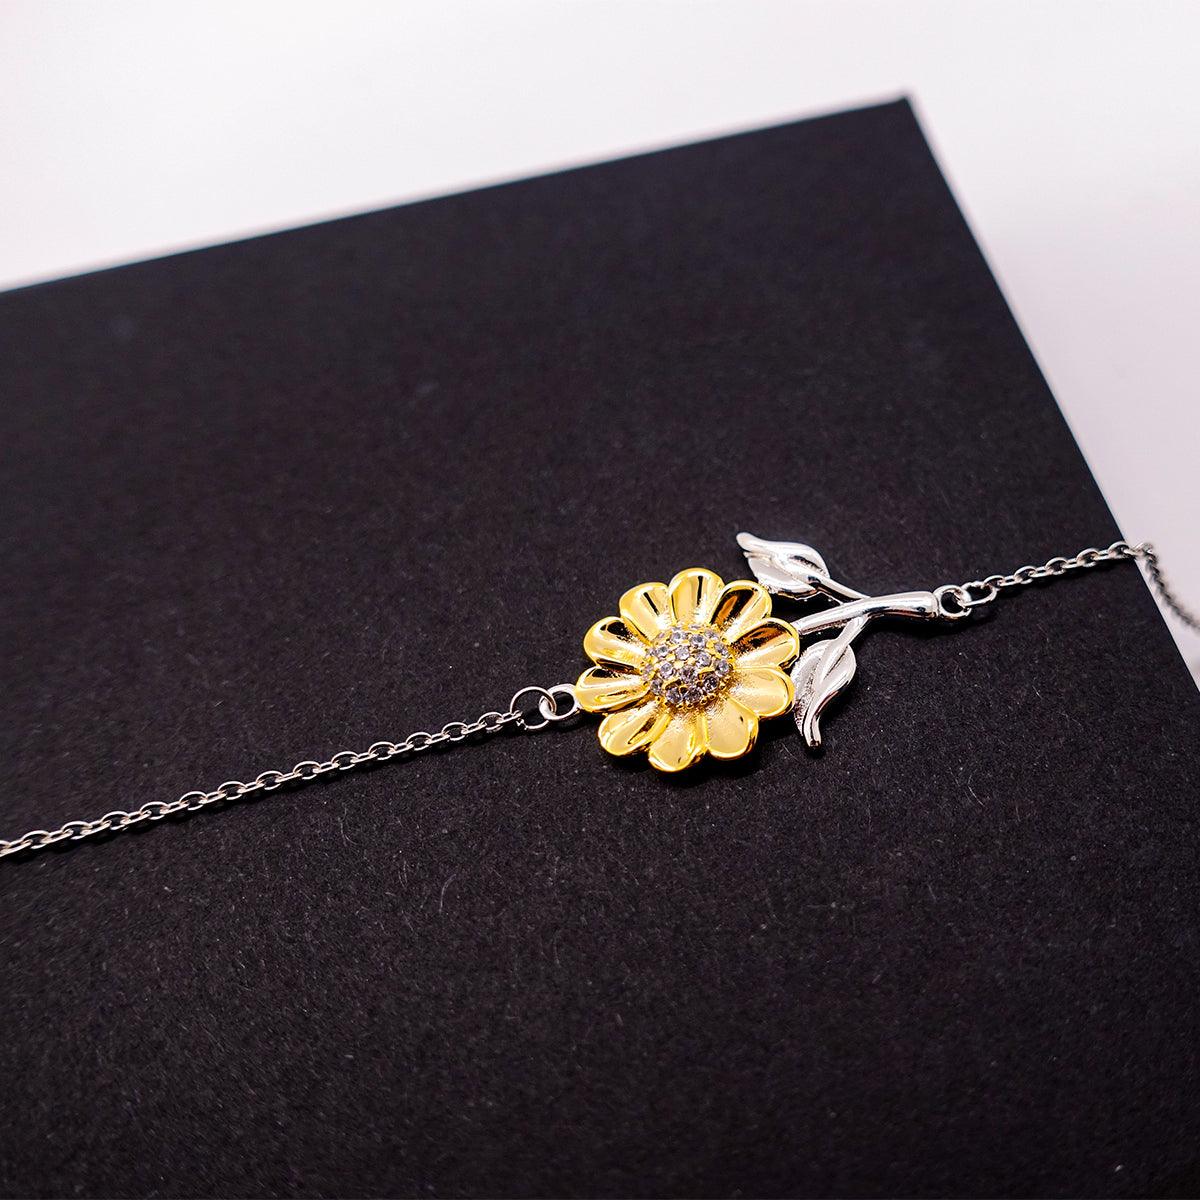 Orthodontist Sunflower Bracelet - Thanks for being who you are - Birthday Christmas Jewelry Gifts Coworkers Colleague Boss - Mallard Moon Gift Shop